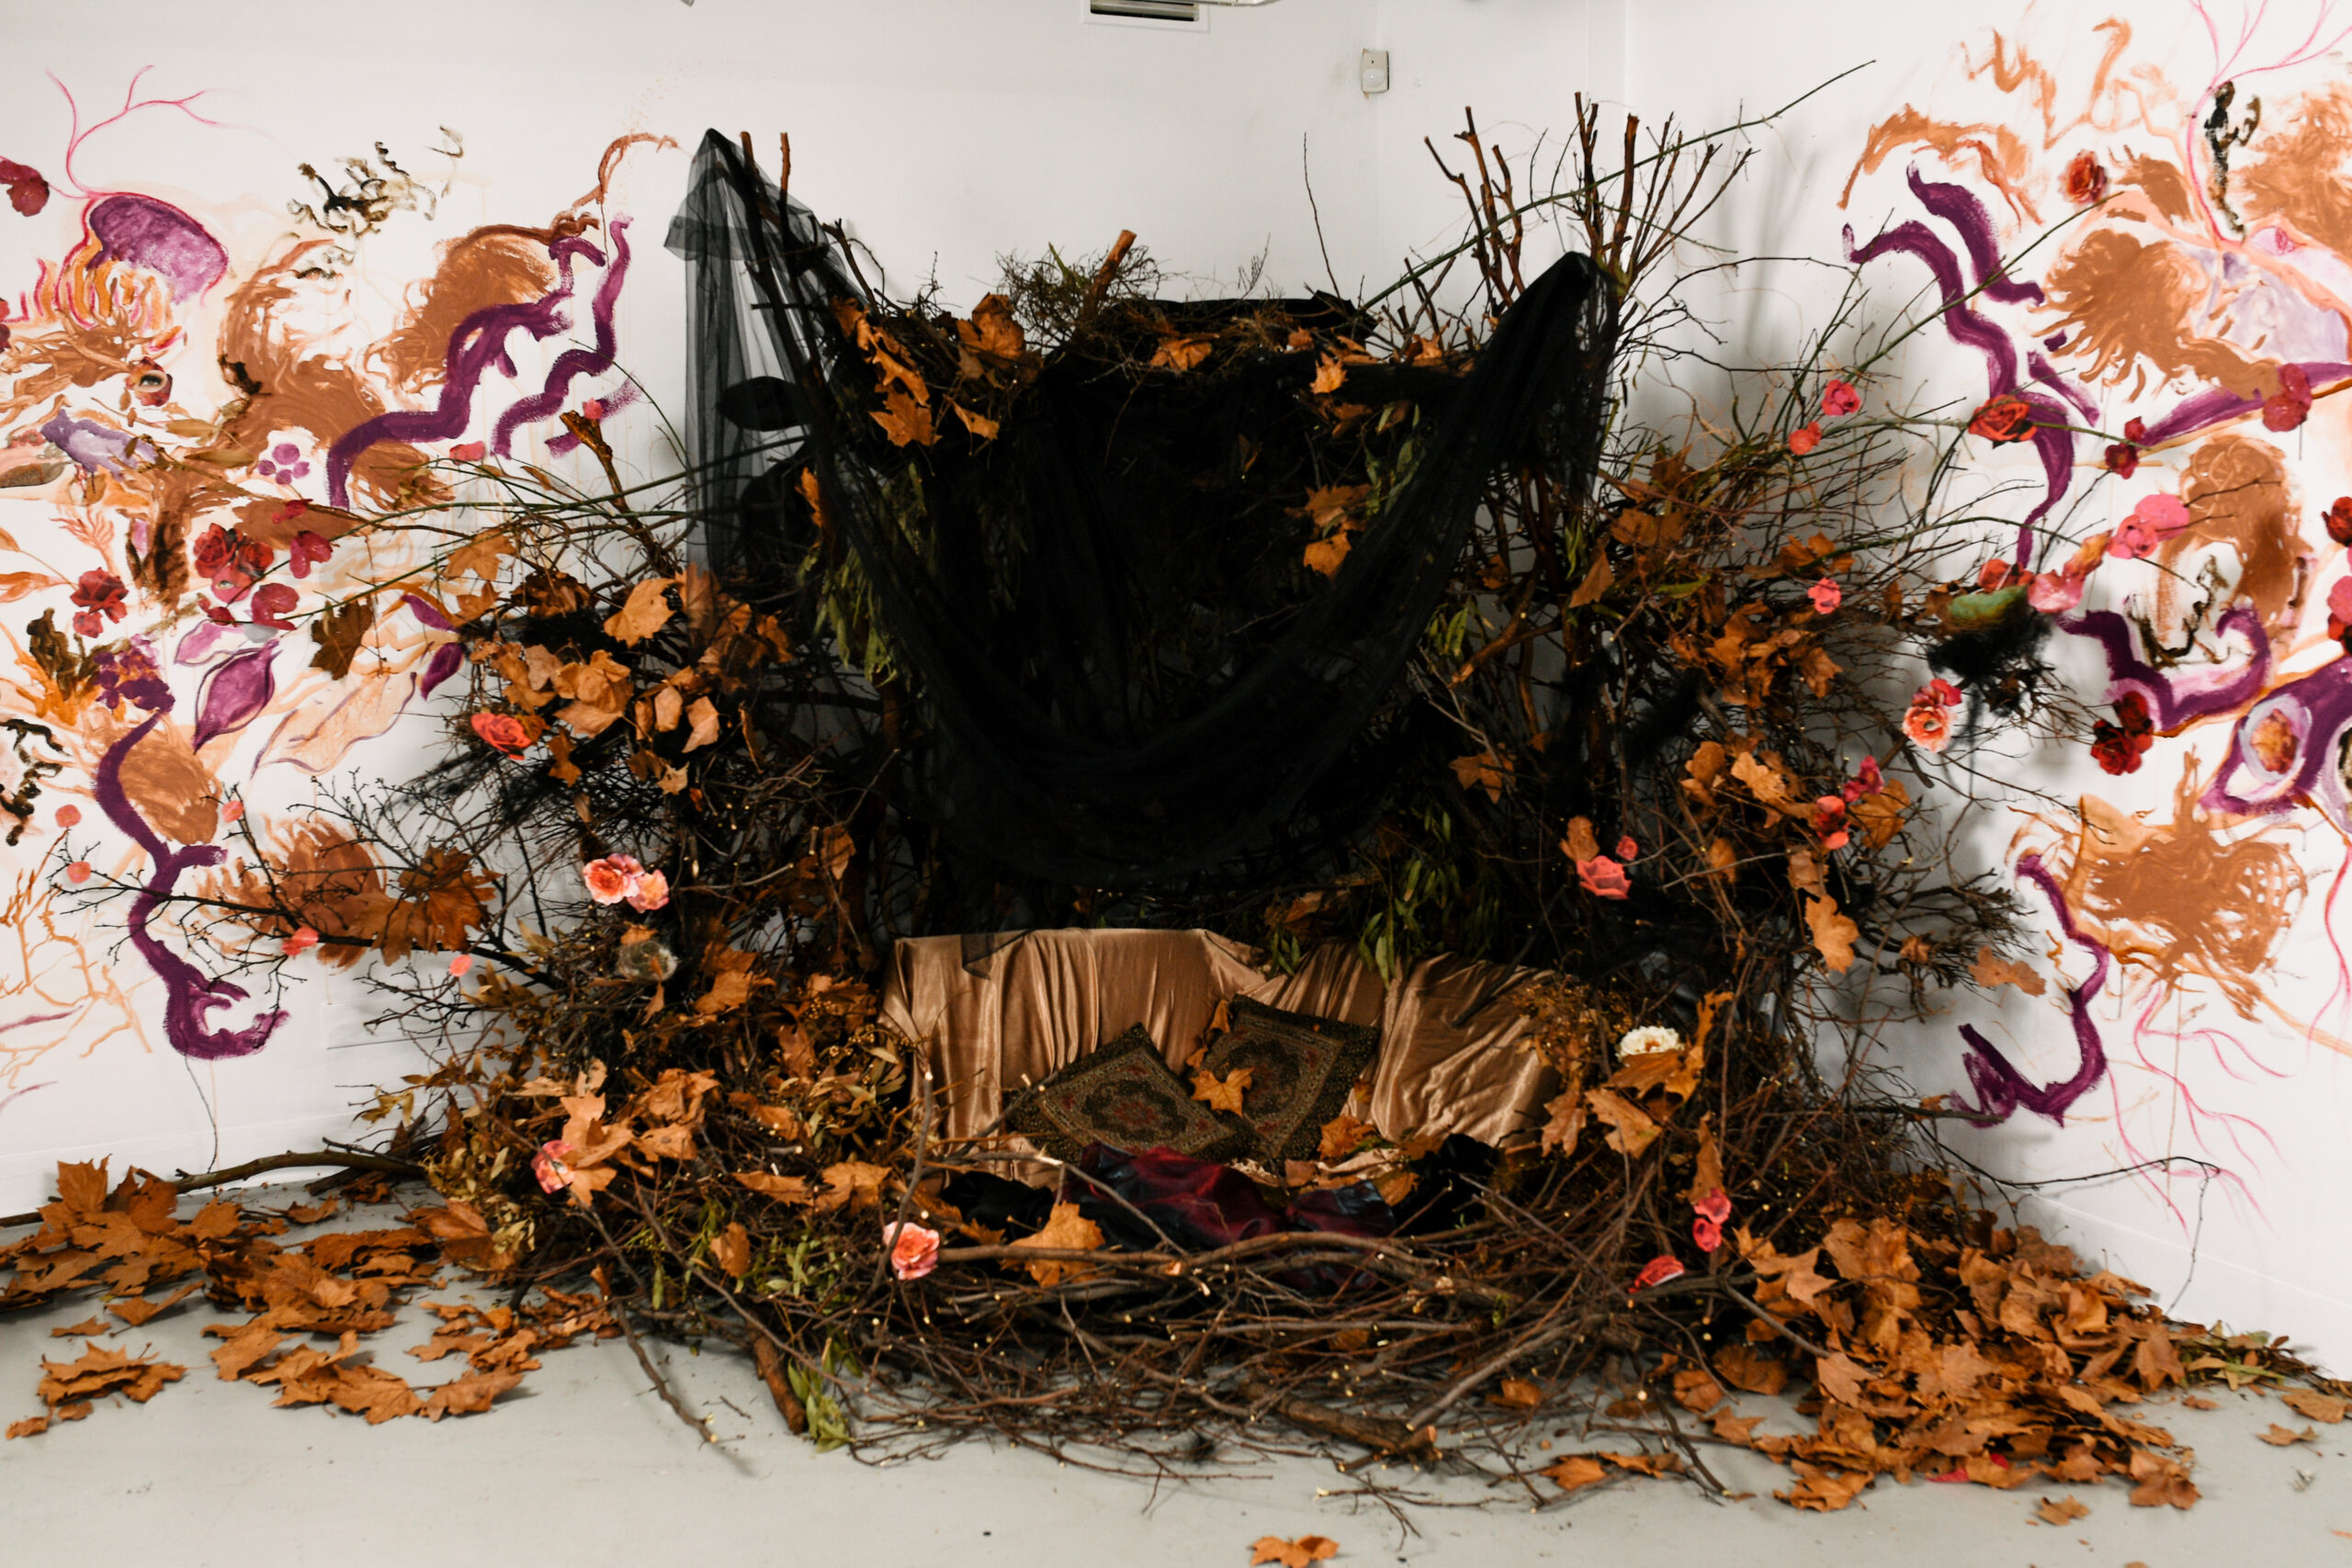 A shrine like sculptural installation in the corner of the gallery of dried flowers, foliage, black sheer fabric and silken gold fabric against an abstract wall painting.